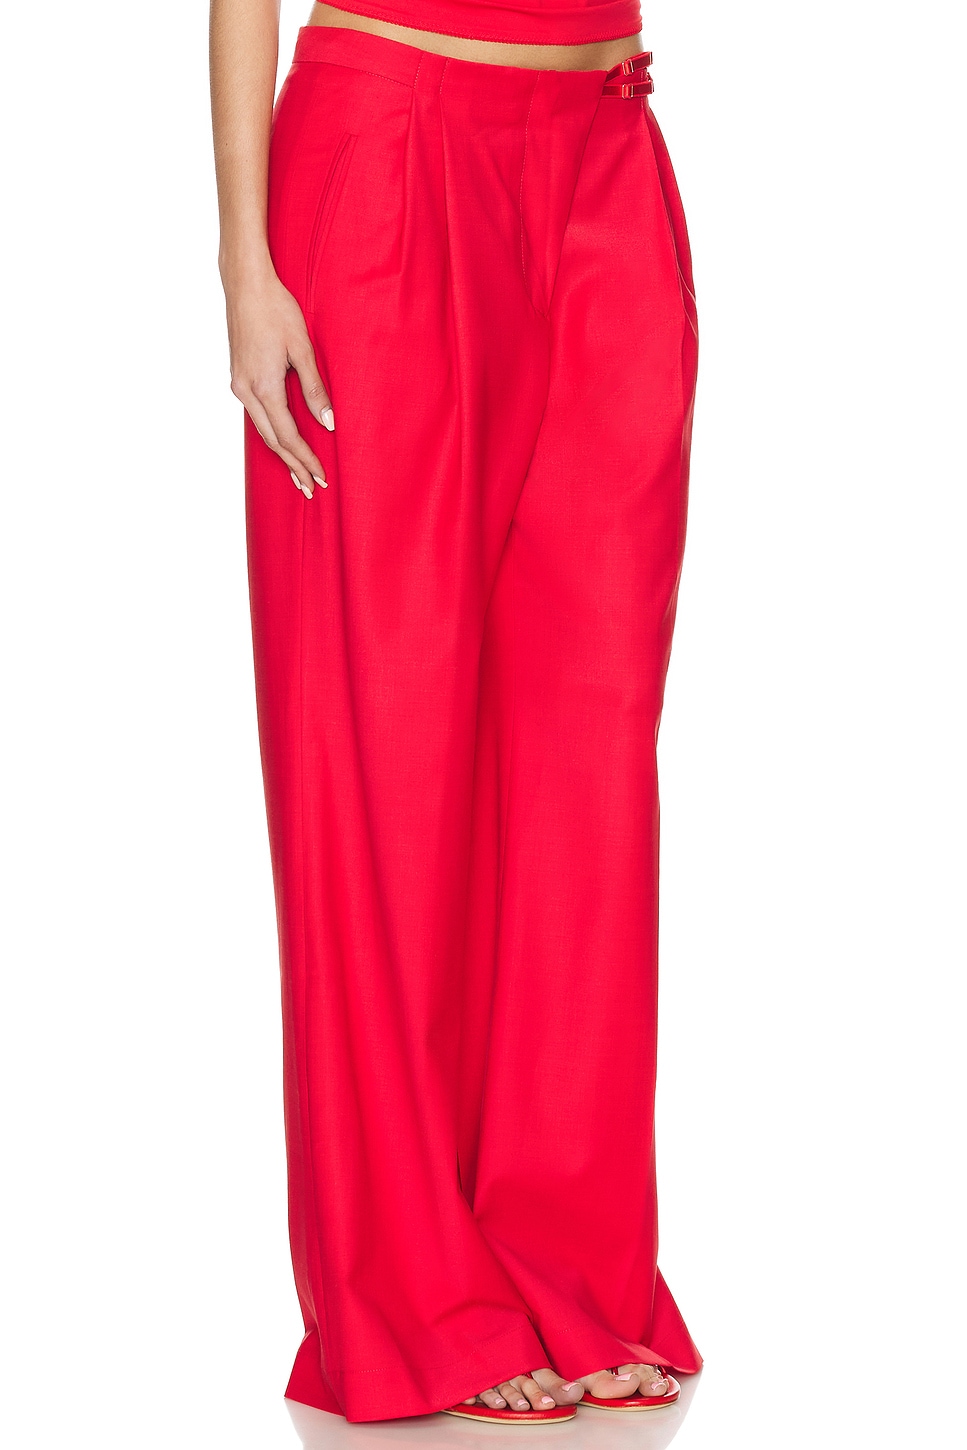 Shop Anna October Noemie Pant In Red